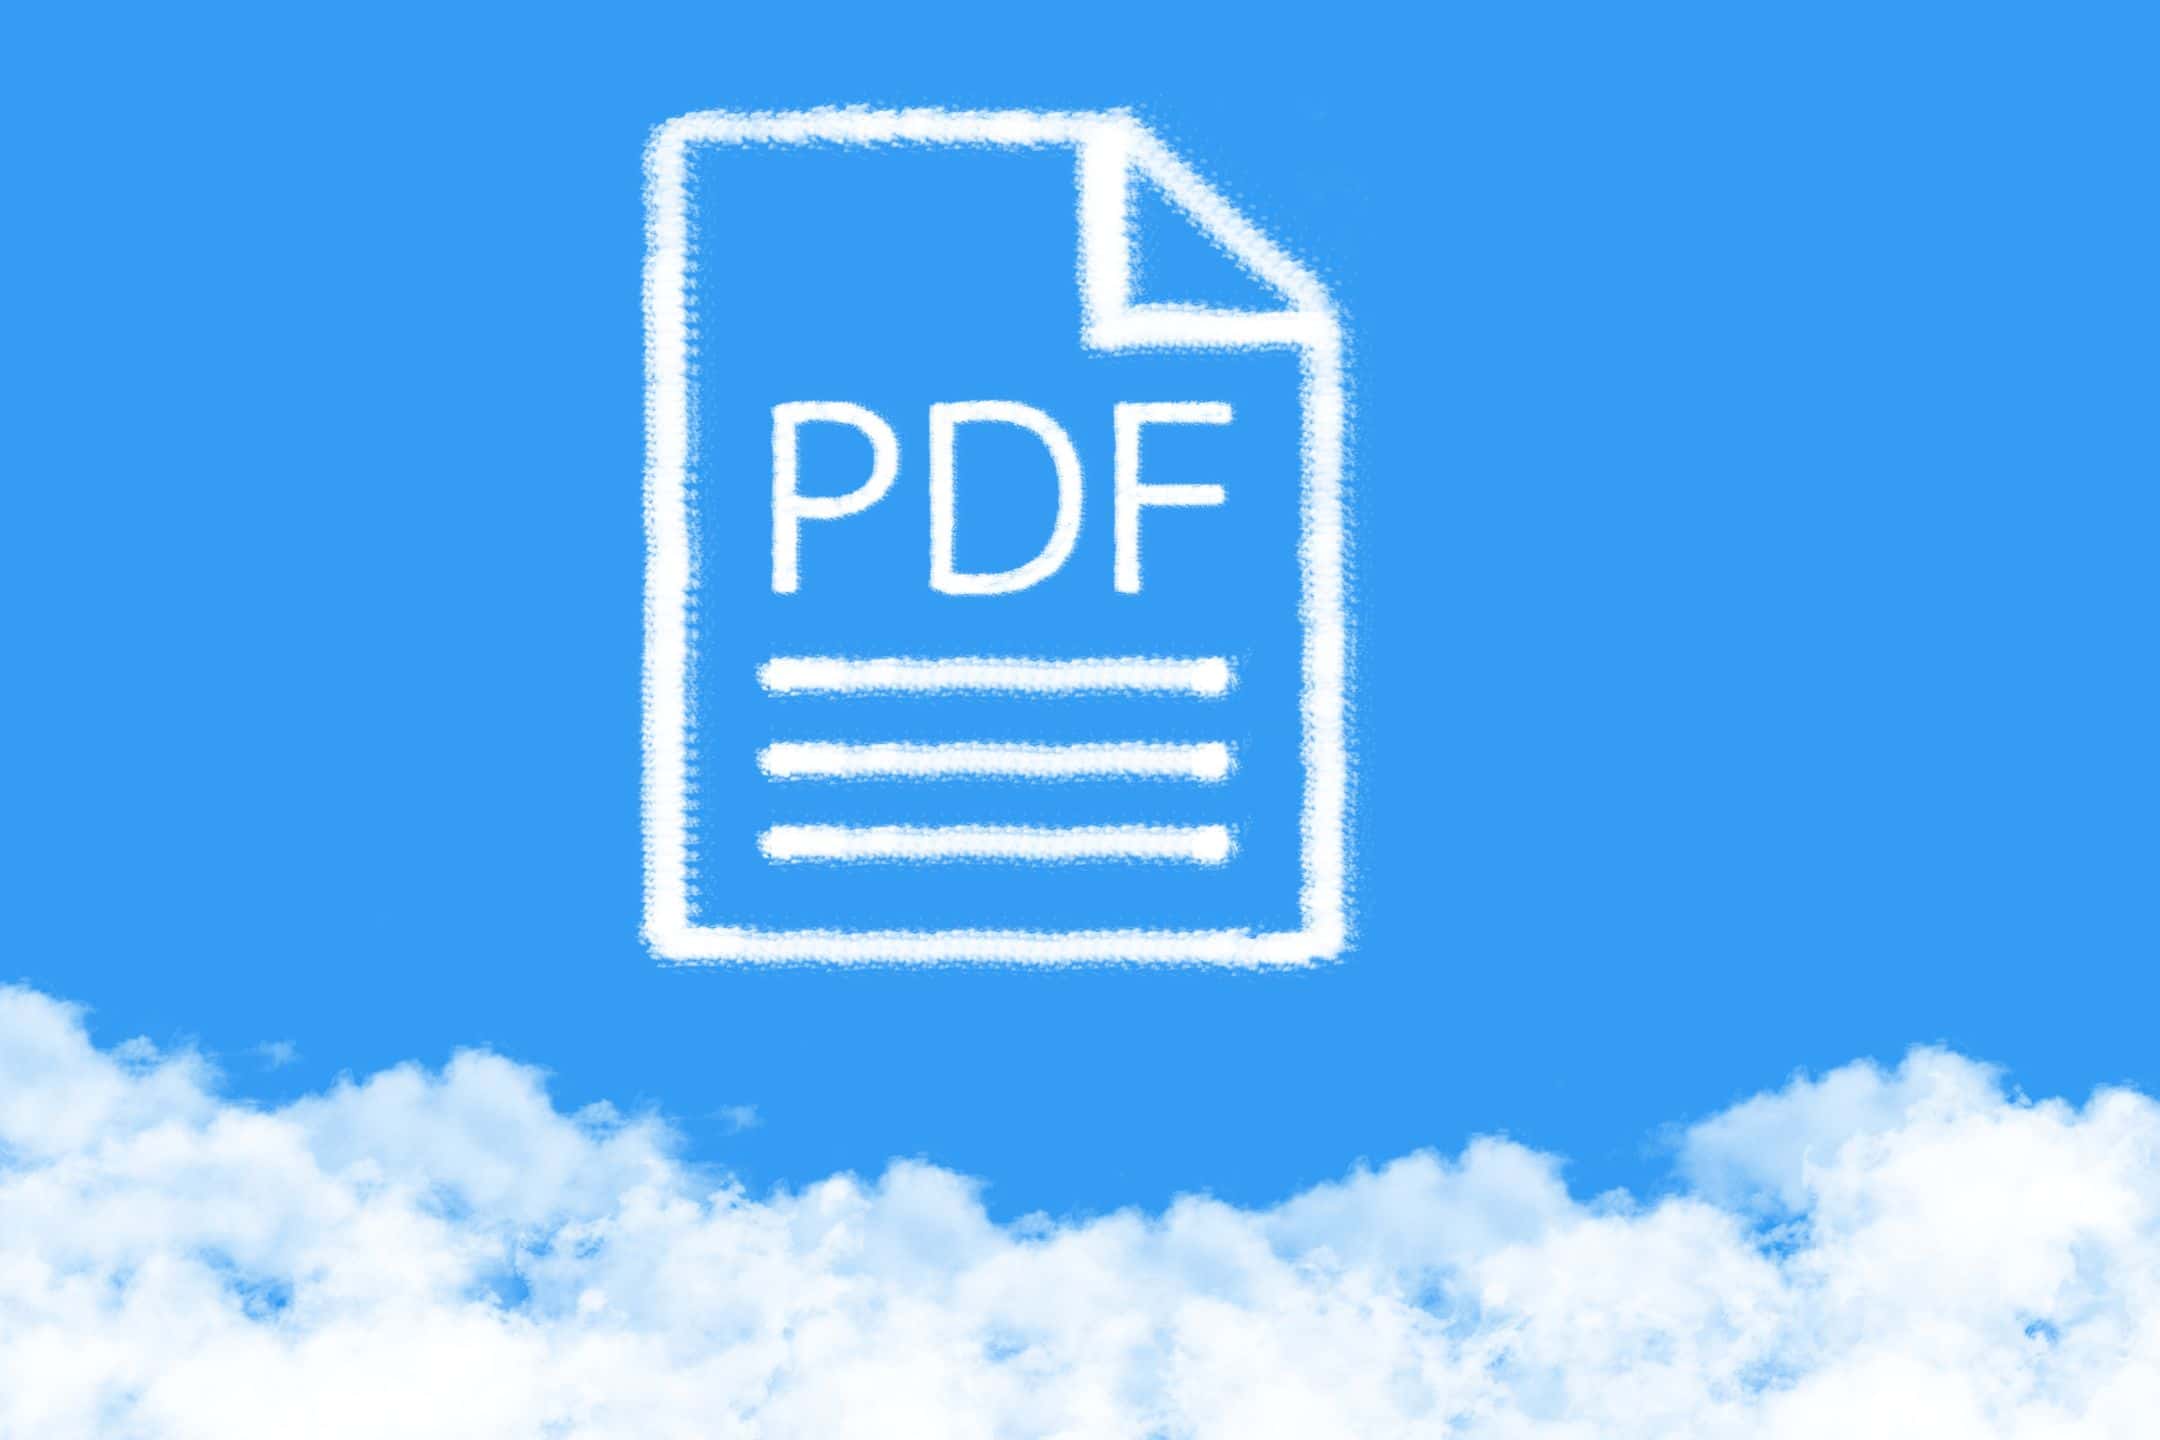 pdf file illustration on top of clouds in blue sky